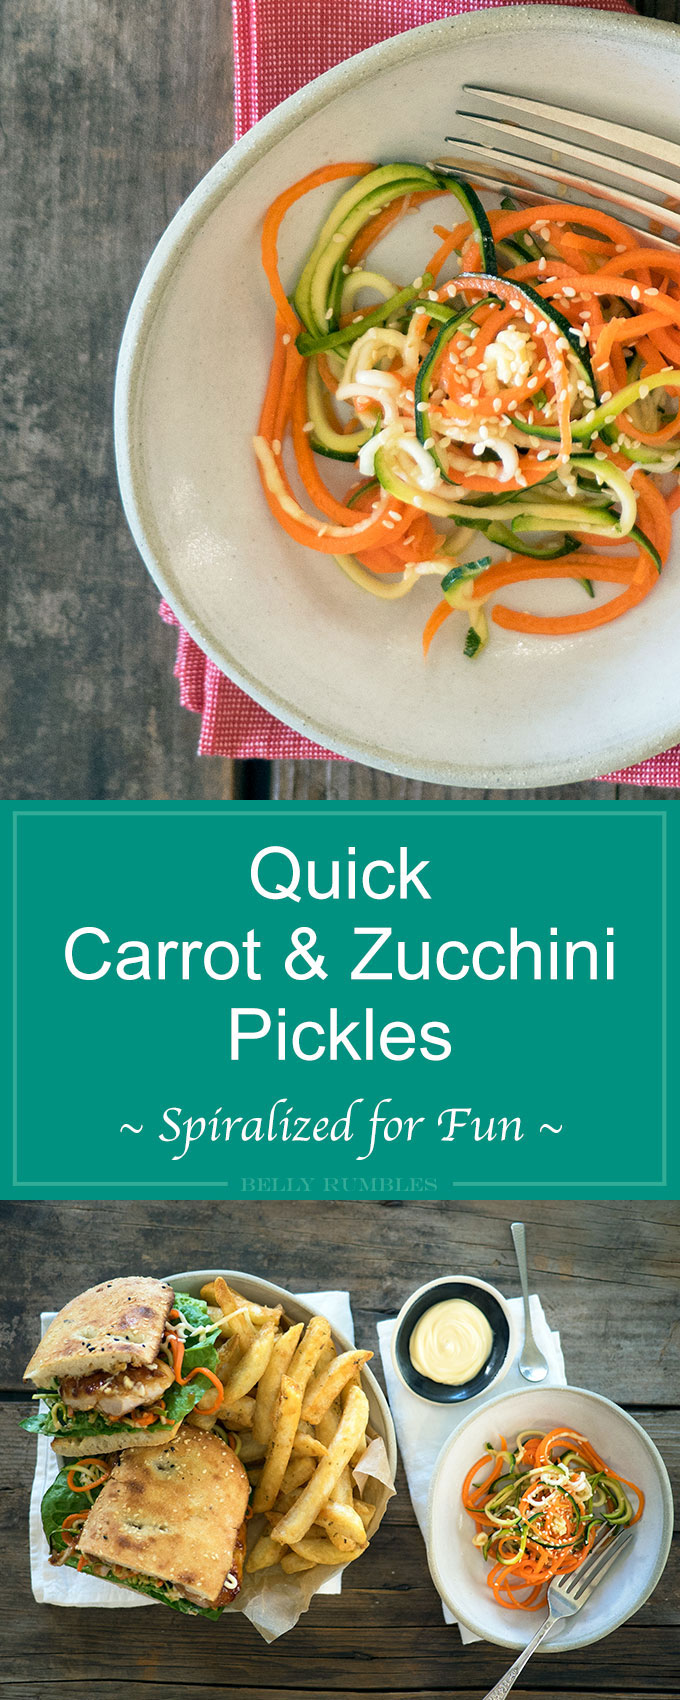 Quick Carrot and Zucchini Pickles are fantastic on burgers, sandwiches, and wraps. They are also brilliant in salads and they are quick and easy to make.